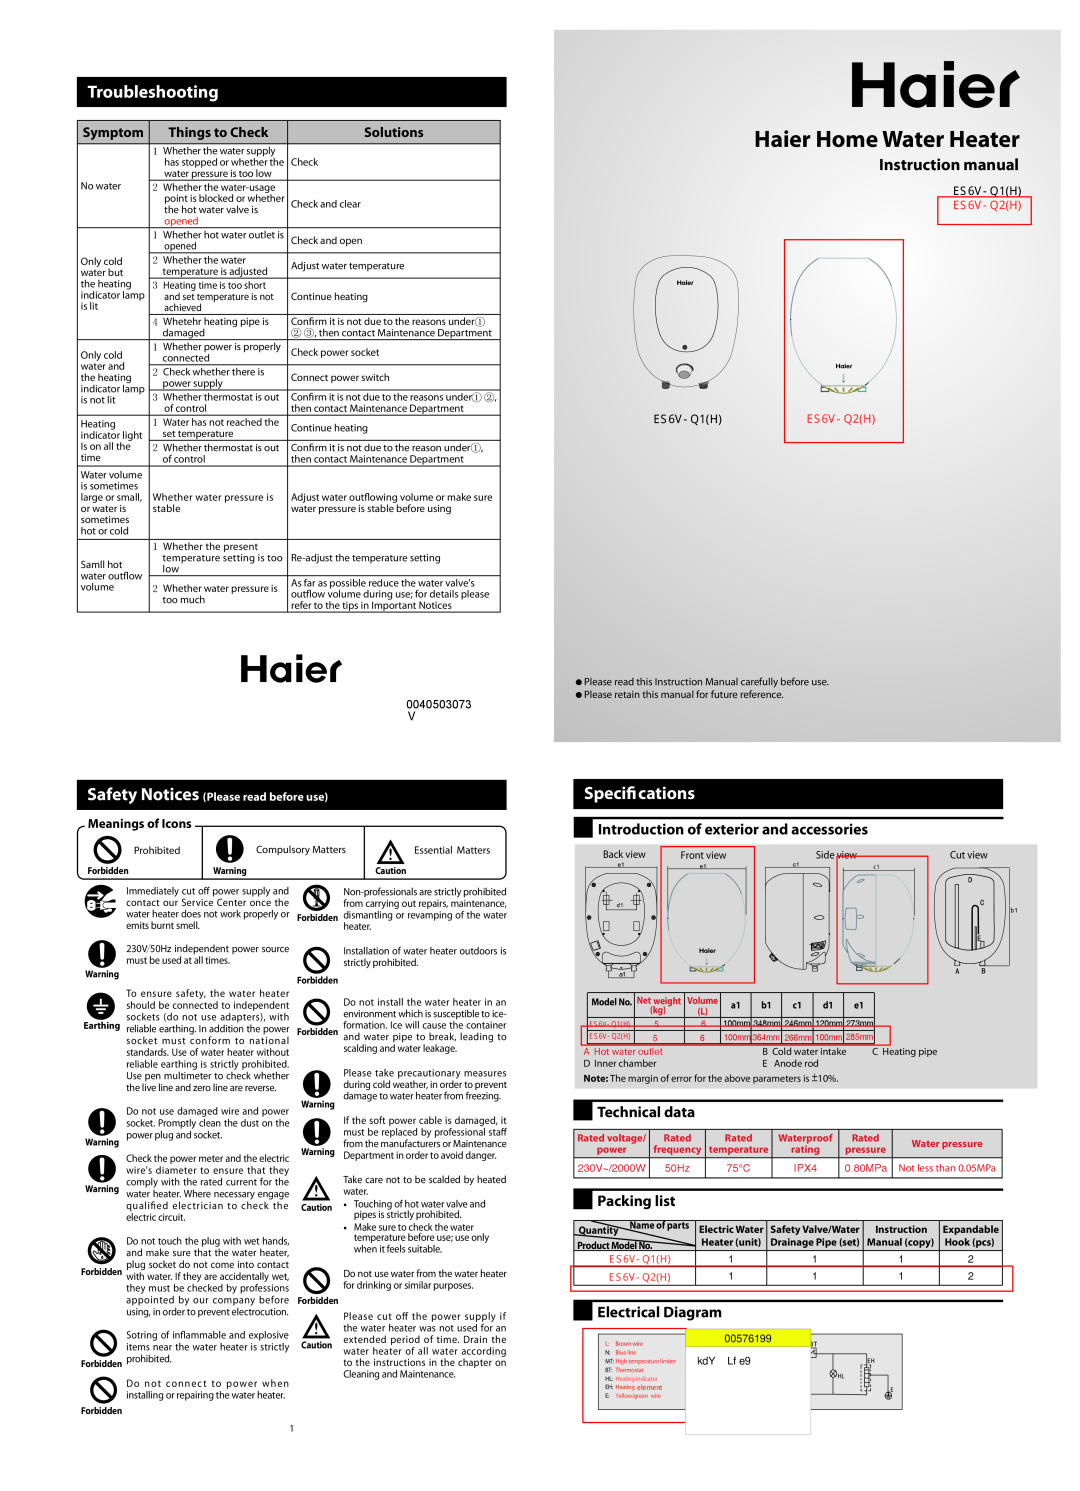 Haier 40503073 instruction manual Troubleshooting, Specications, Introduction of exterior and accessories, Technical data 